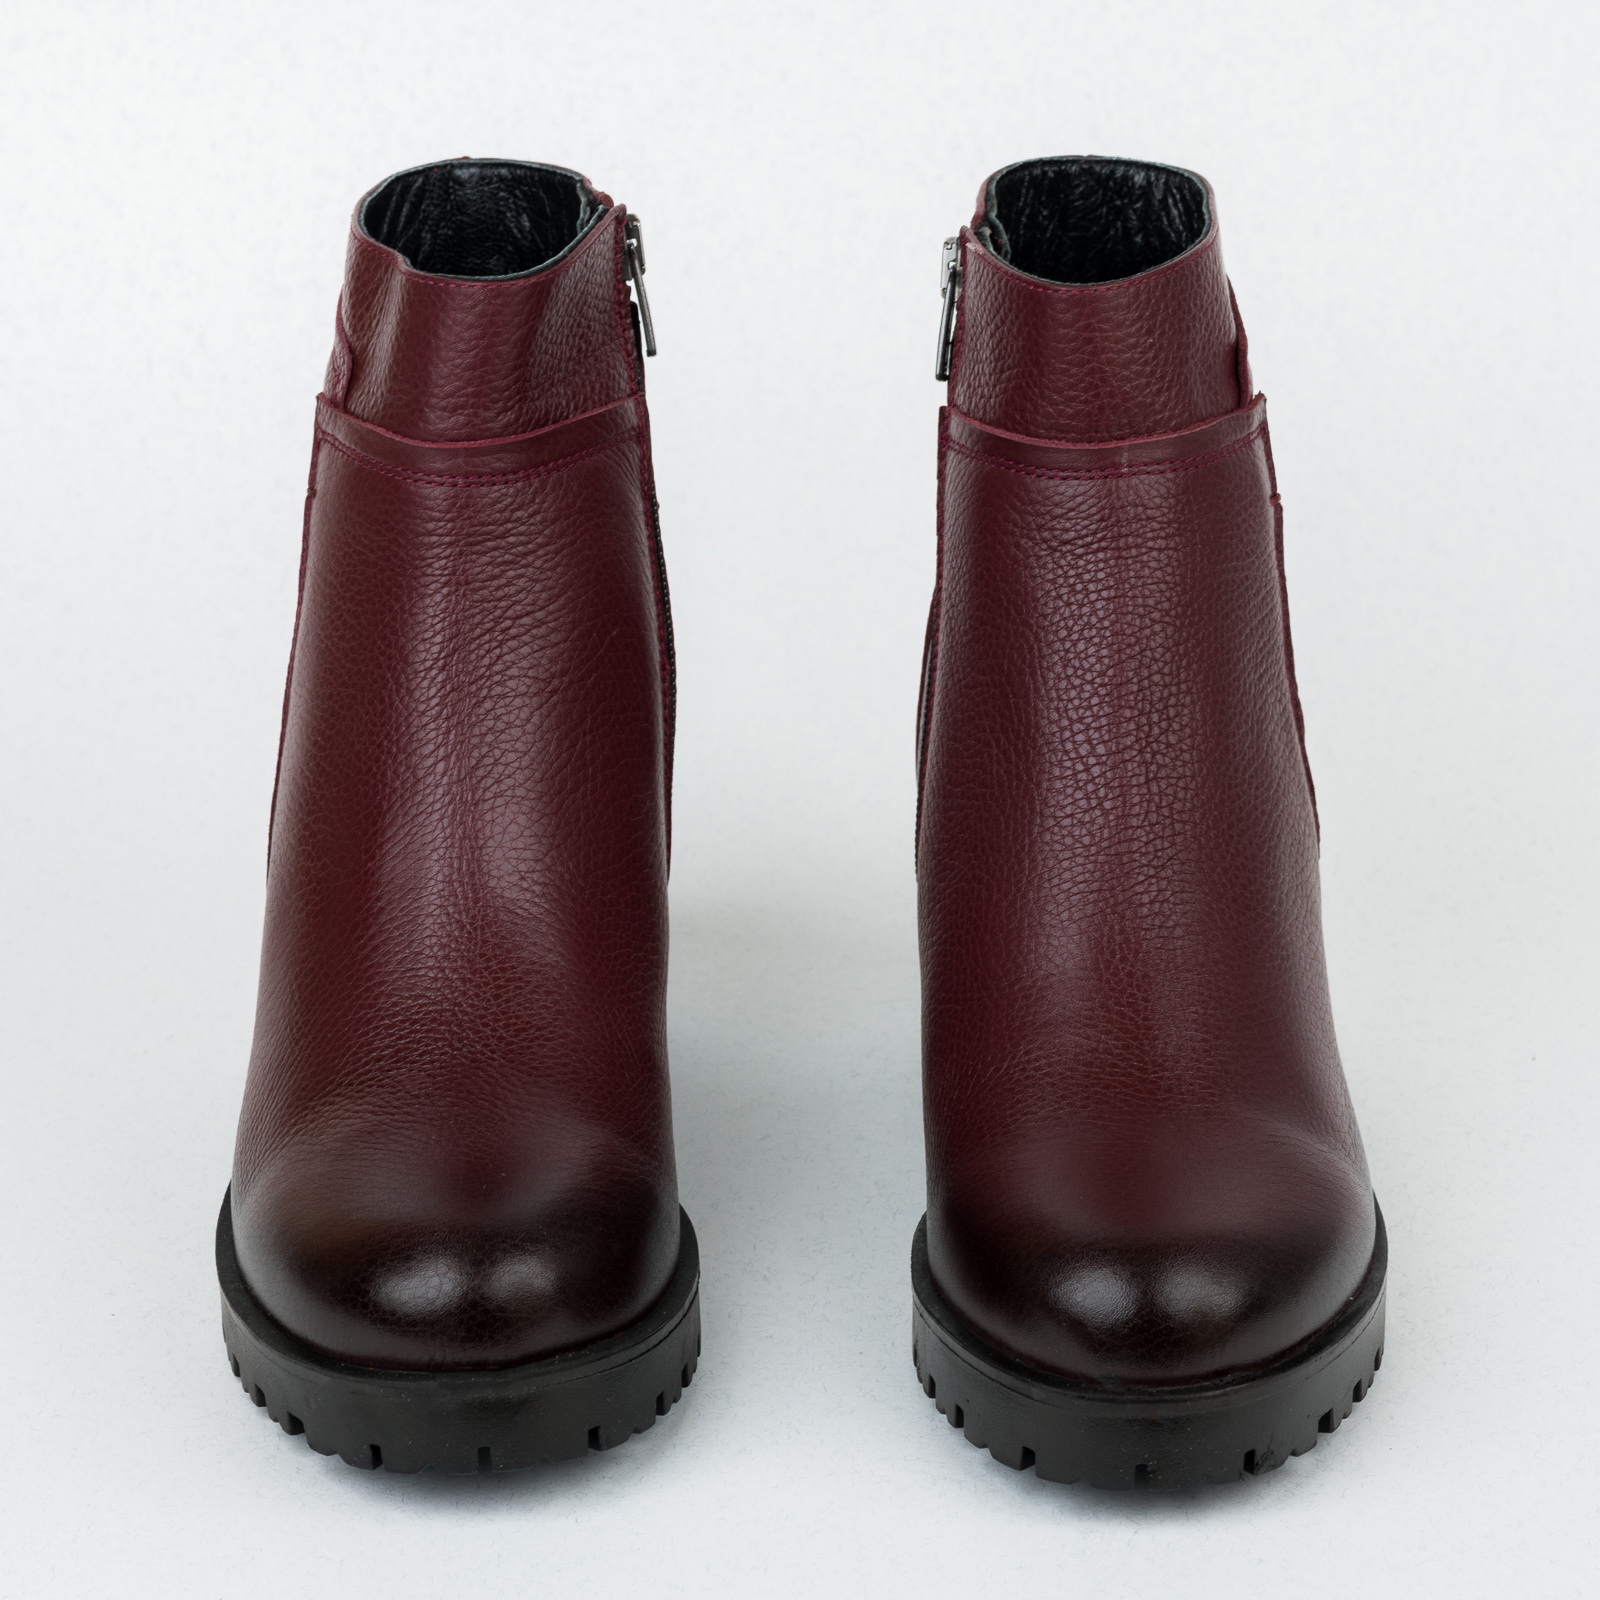 Leather ankle boots B439 - WINE RED